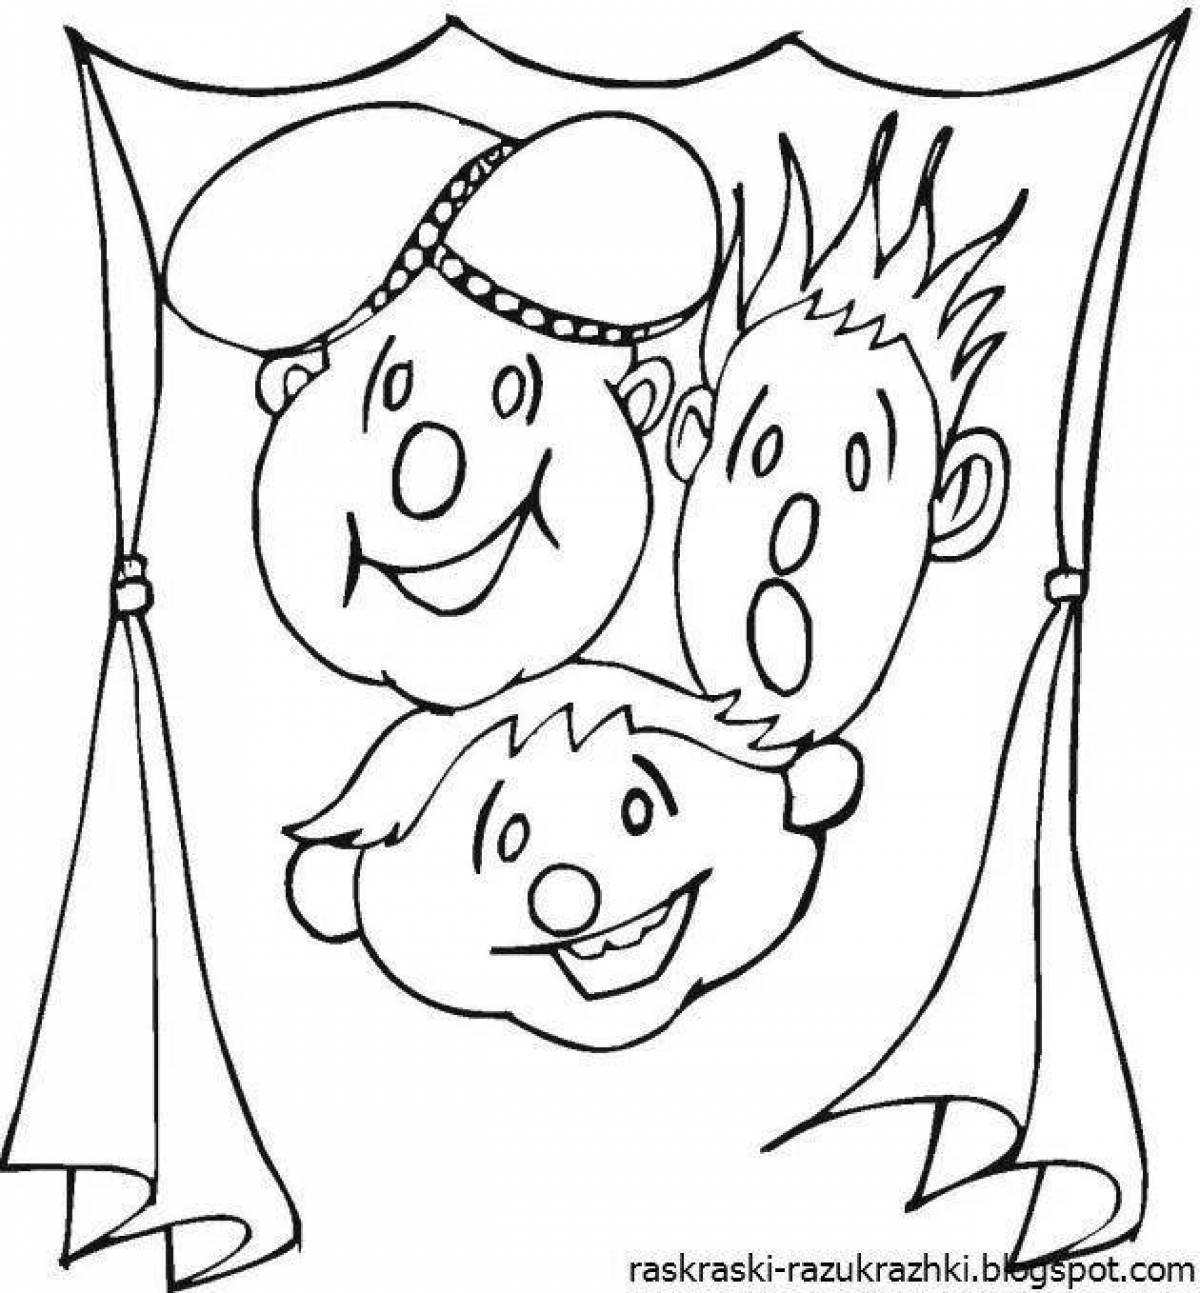 Amazing puppet theater coloring book